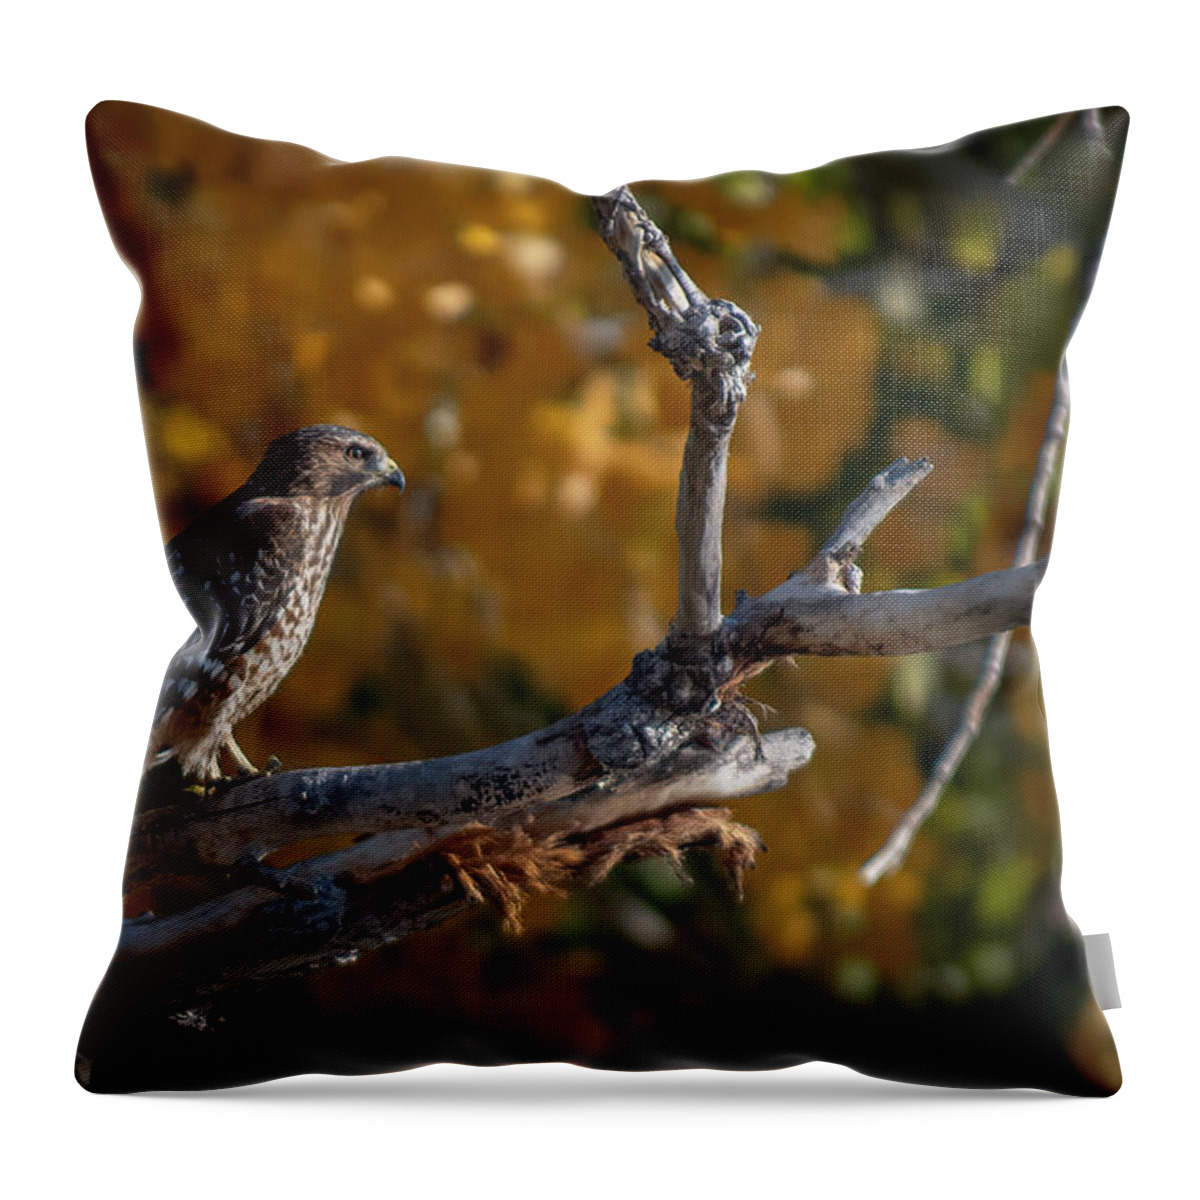 Red Shouldered Hawk Throw Pillow featuring the photograph Red Shouldered Hawk by Rick Mosher